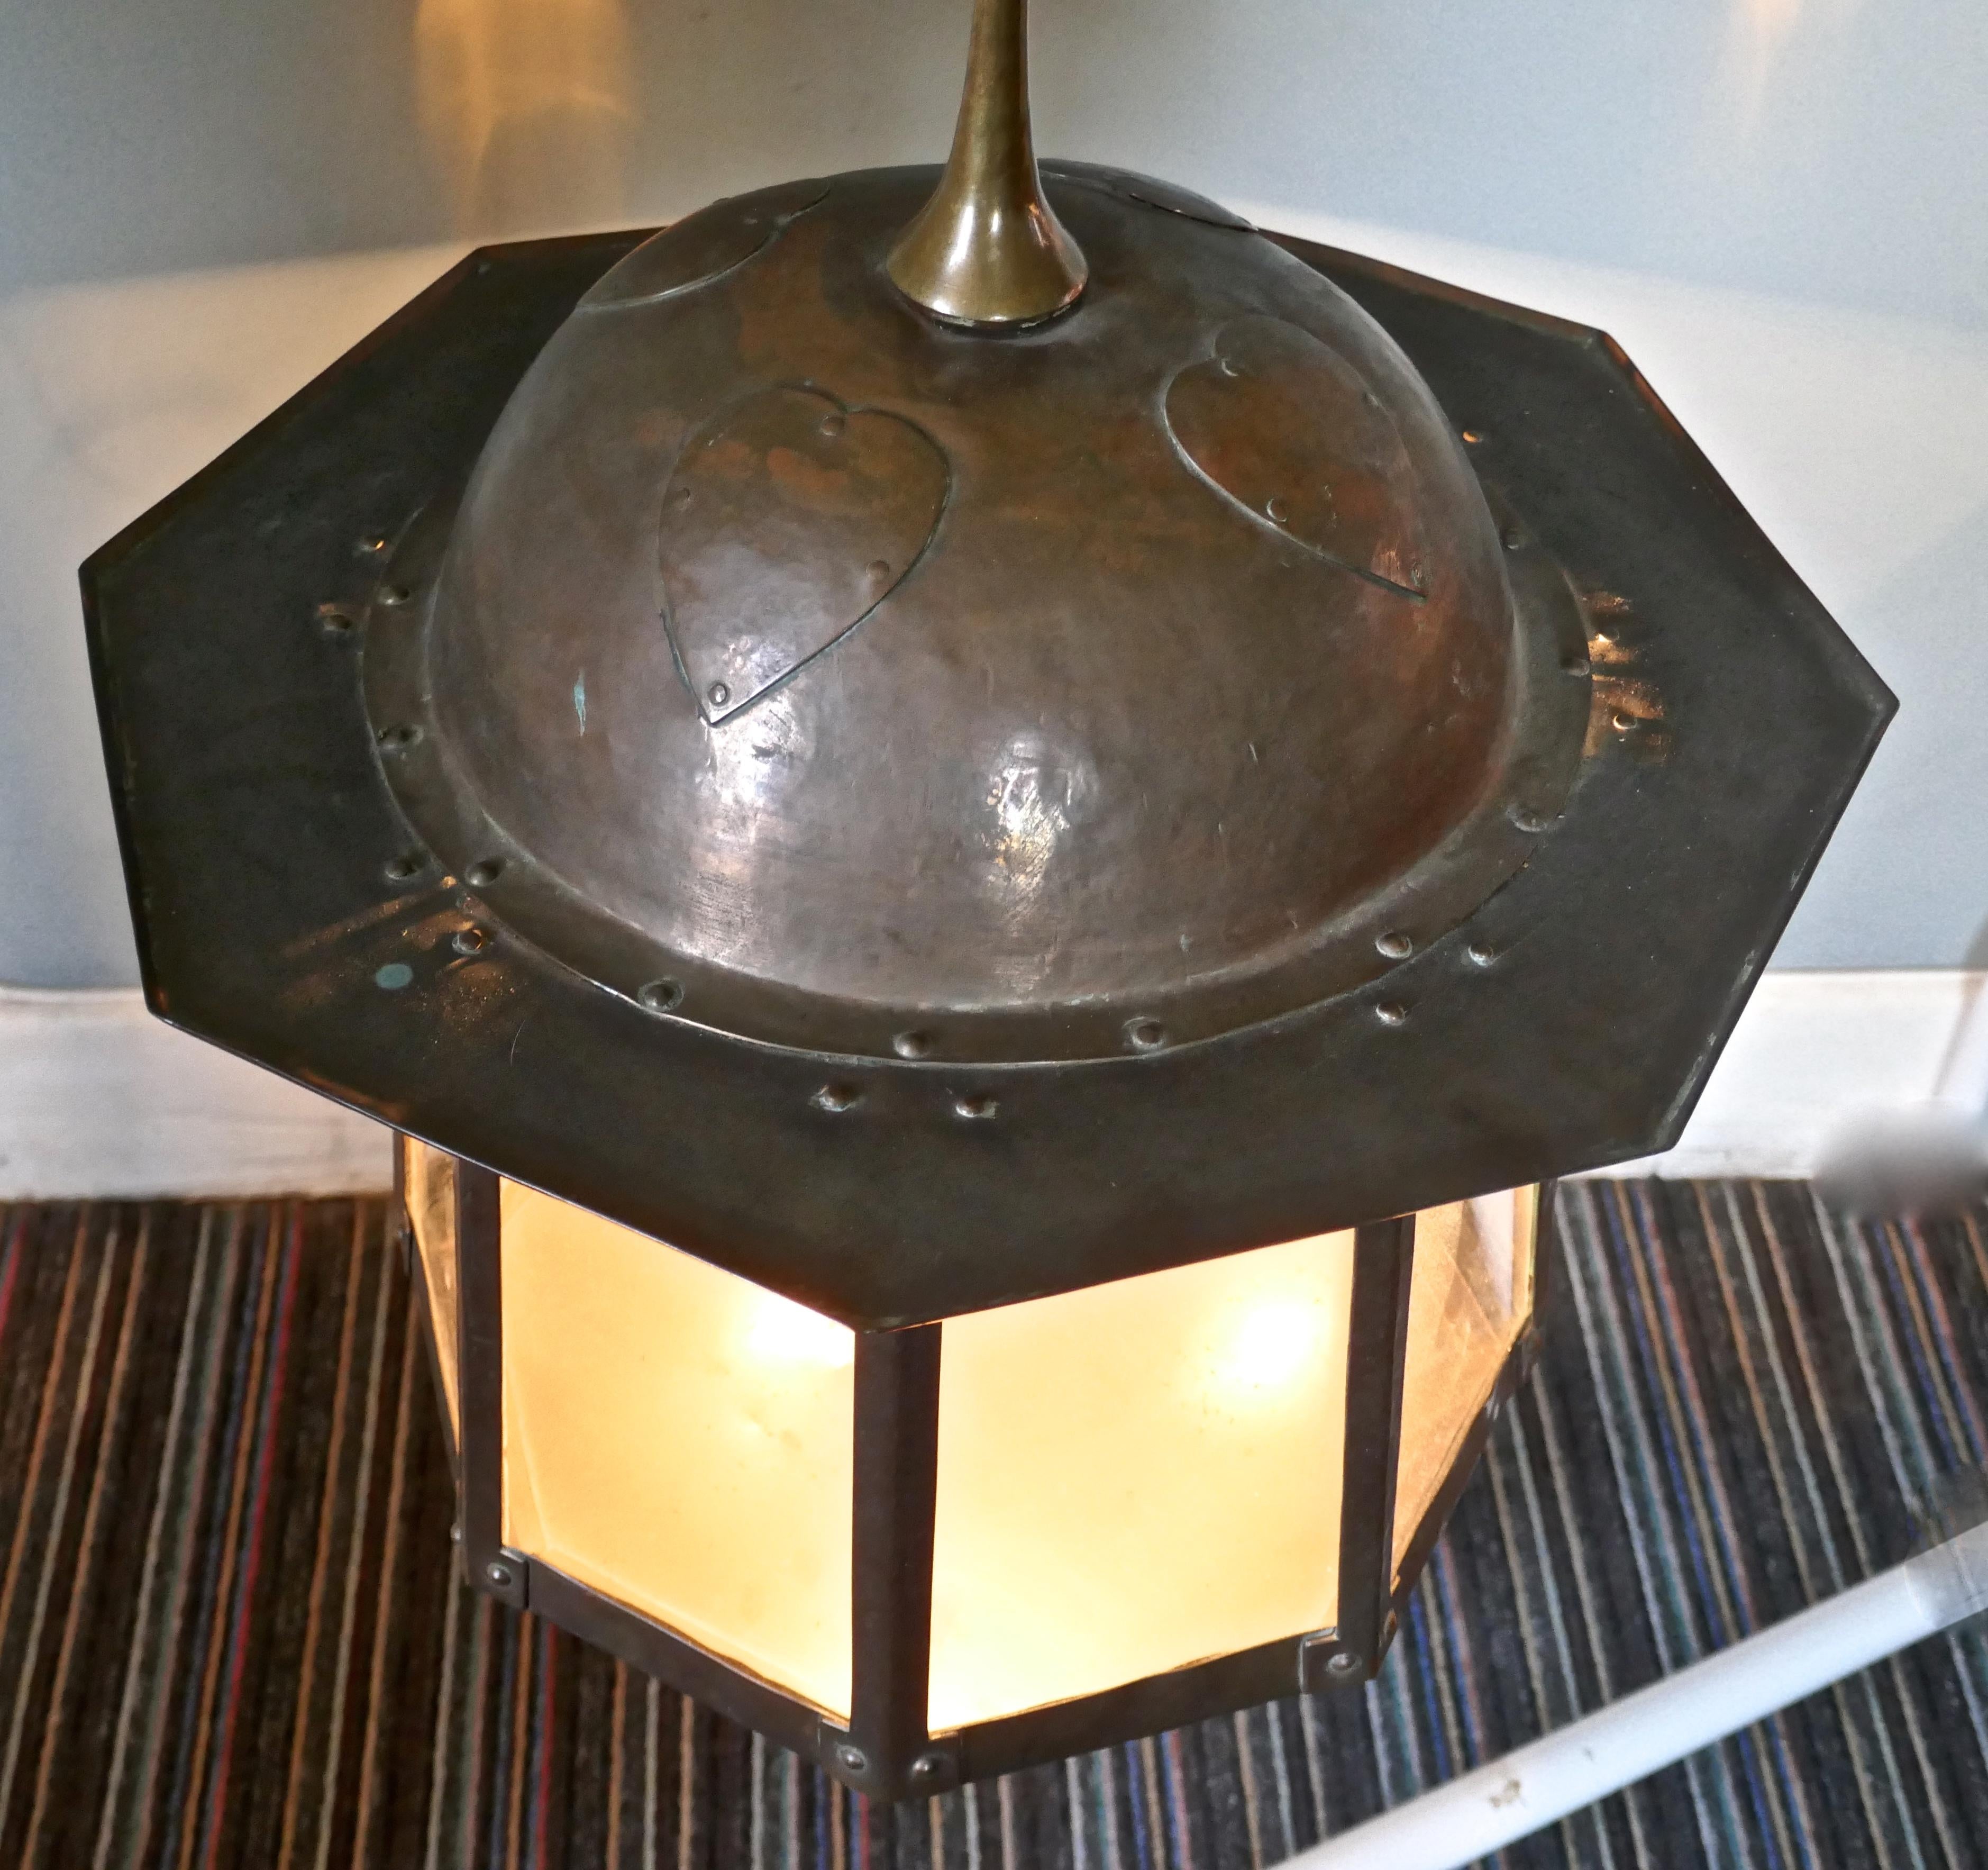 Large Arts & Crafts beaten copper hall lantern ceiling light

This large copper hall lantern is of classic Arts & Crafts design, it has glass panels set into each of its 8 sides above each there is an oval amber jewelled glass, which lights when